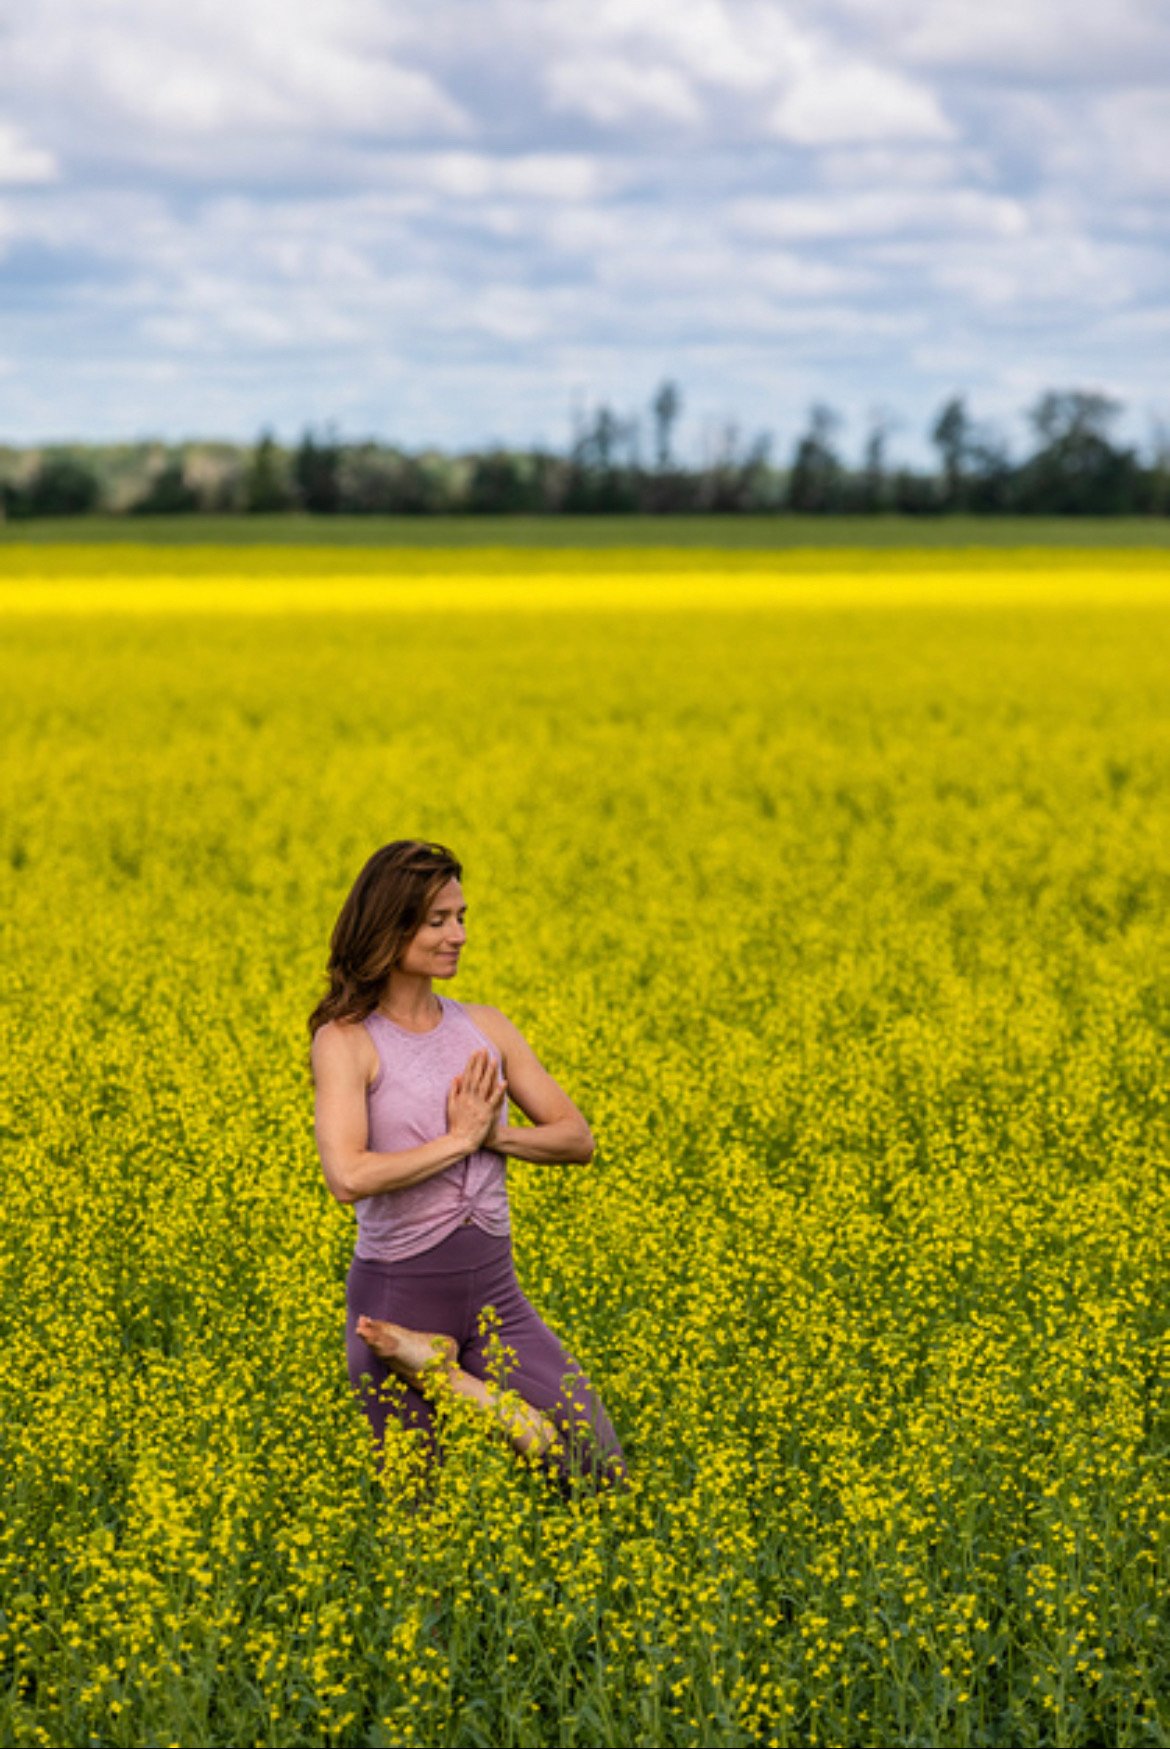 Sam Manchulenko holding tree pose with handing in prayer position standing in a yellow green field